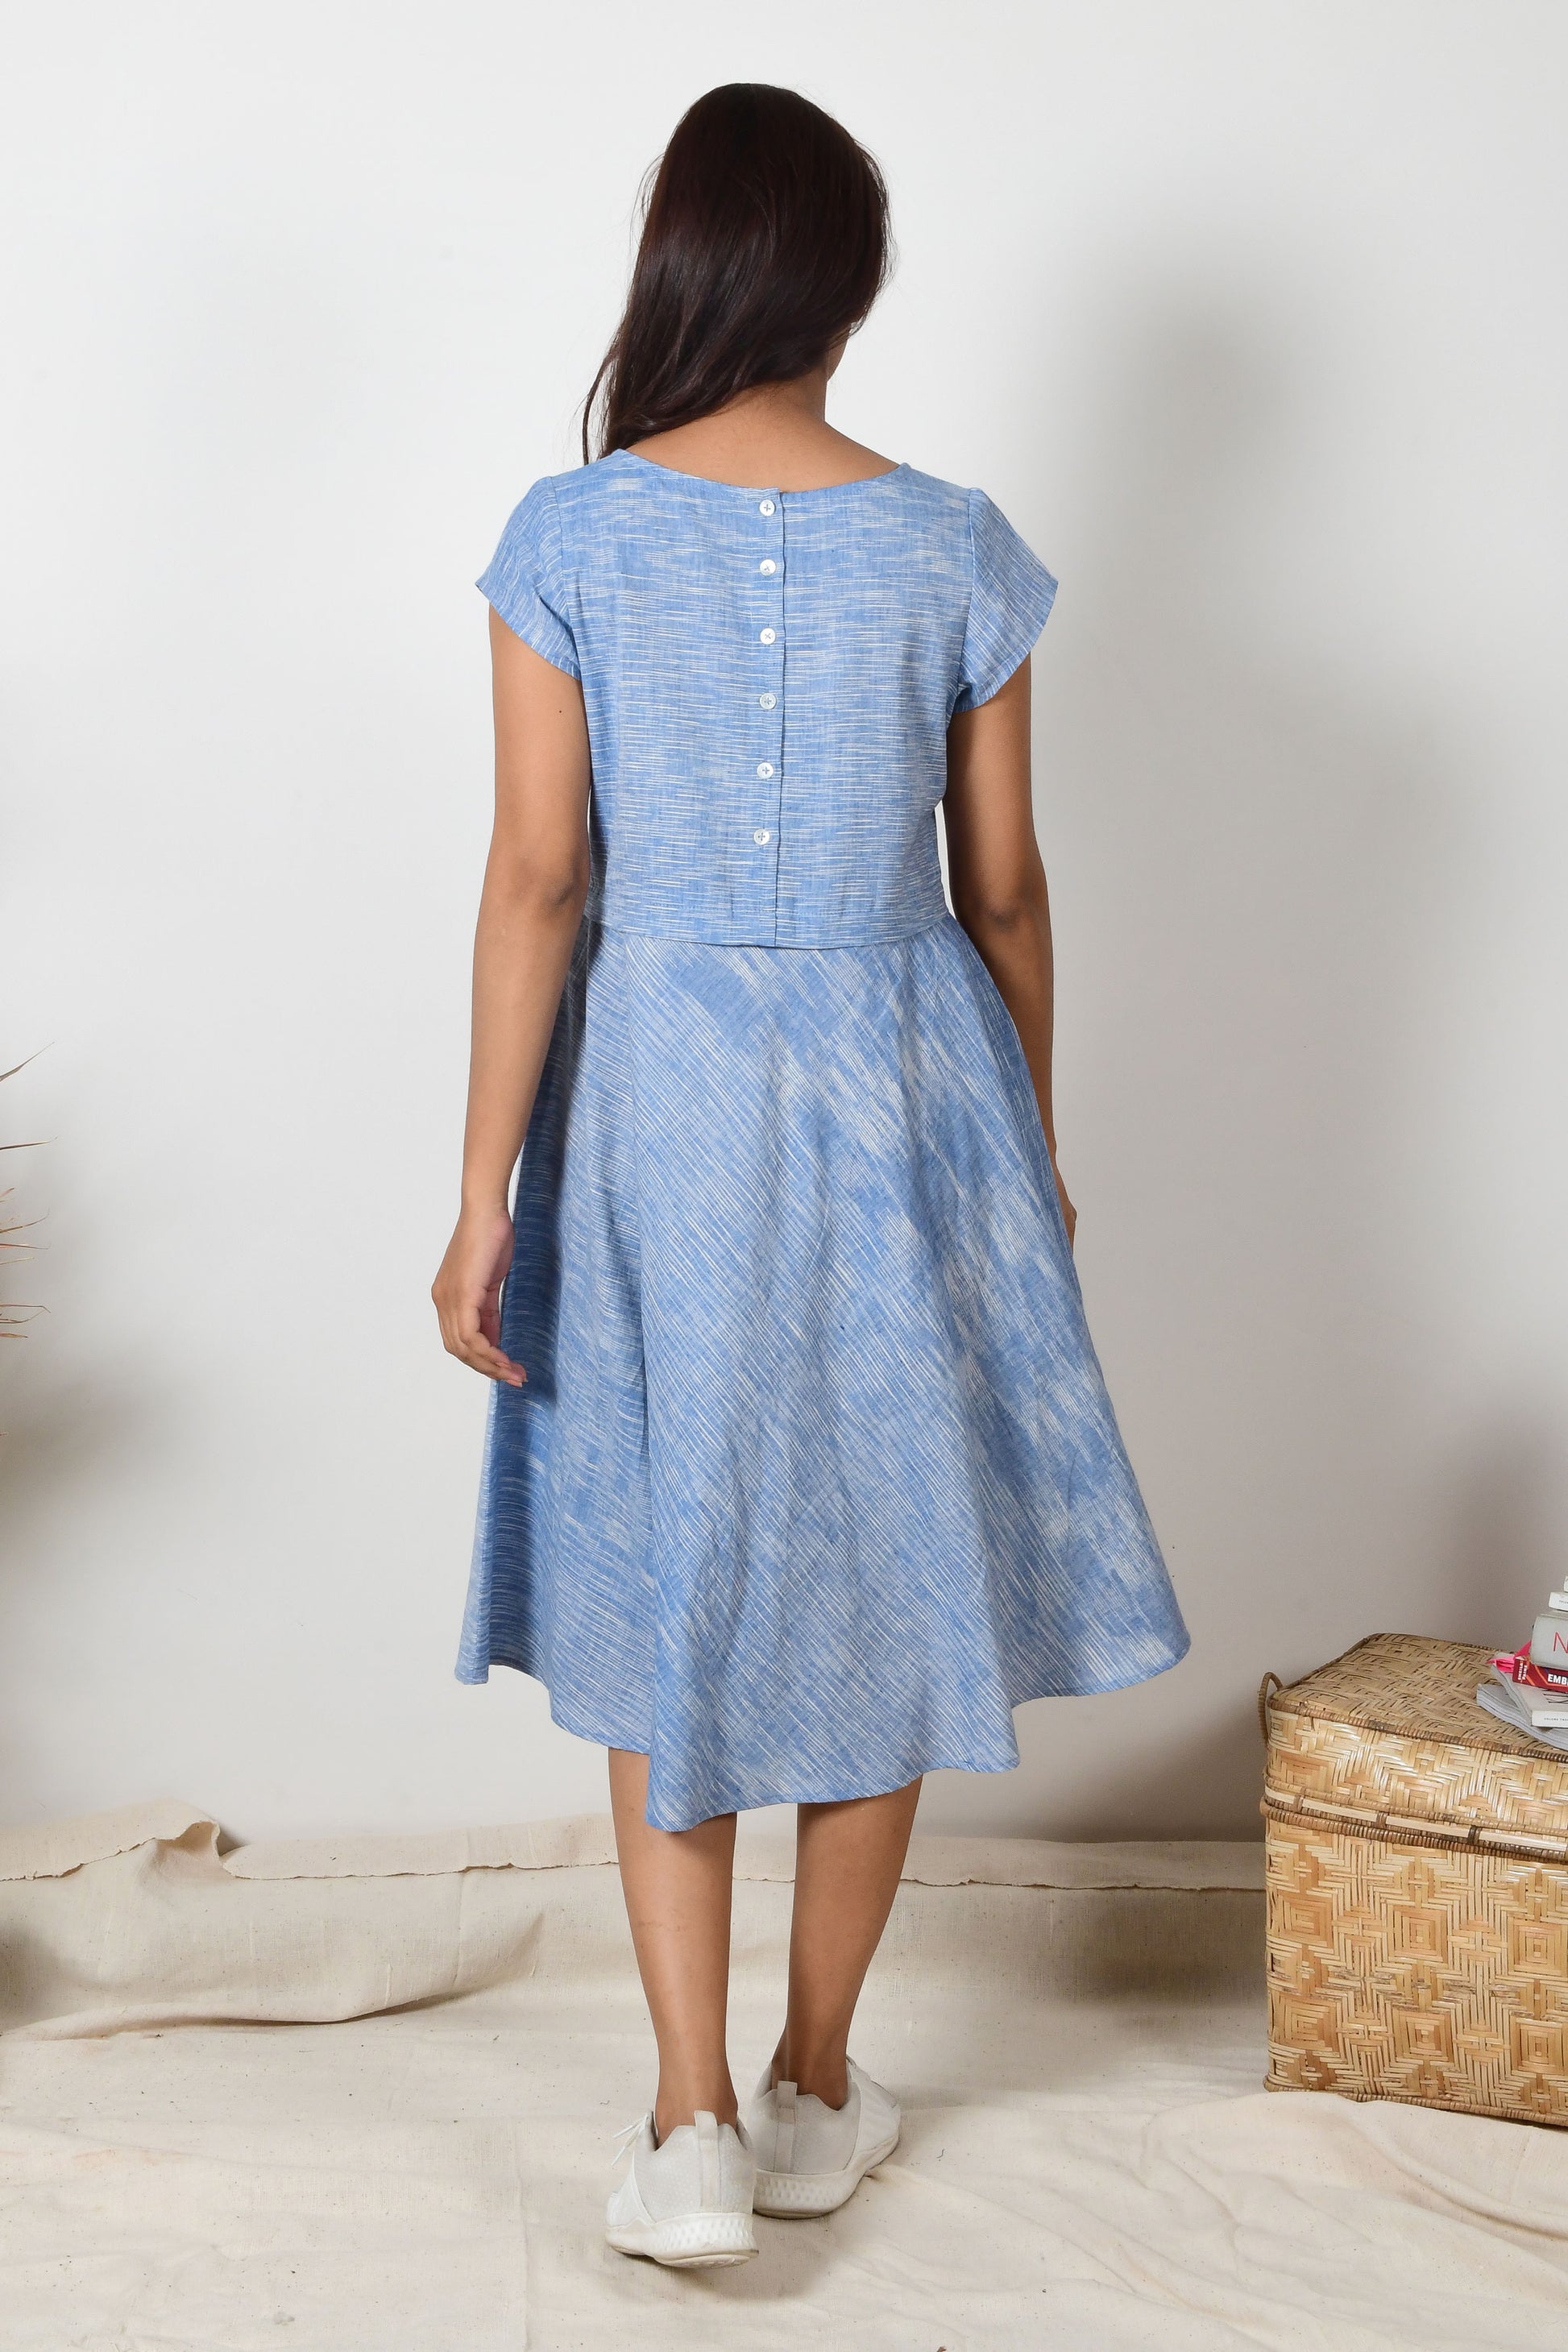 back of an a-line cotton dress of blue colour with button on the bodice worn by an Indian girl with black hair.